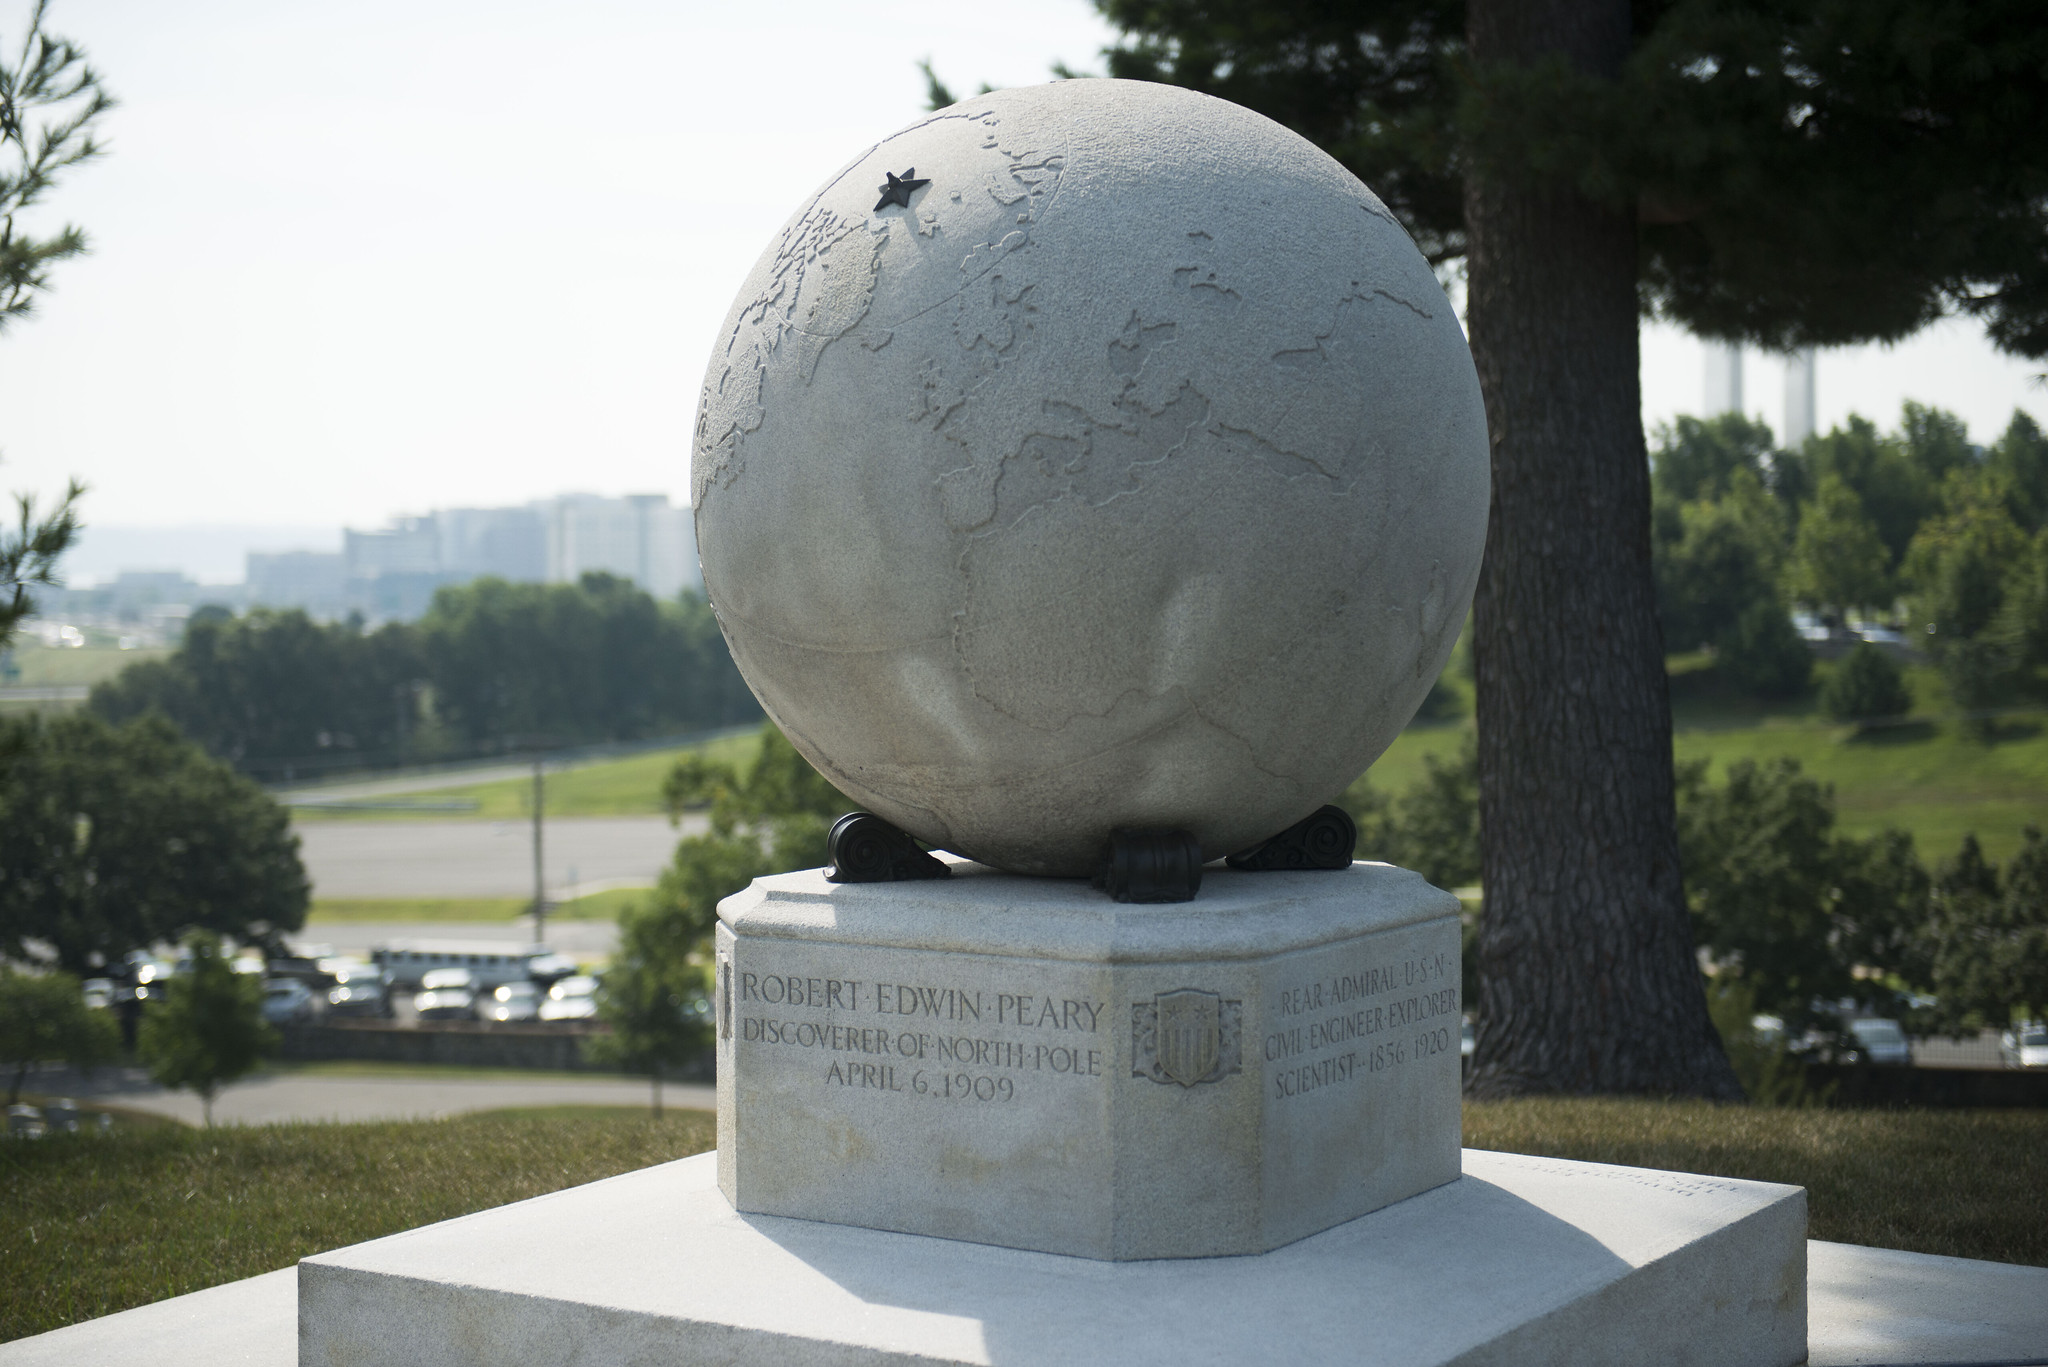 A large white marble globe, with a bronze star marking the North Pole, stands at the gravesite of famed Arctic explorer Robert Peary